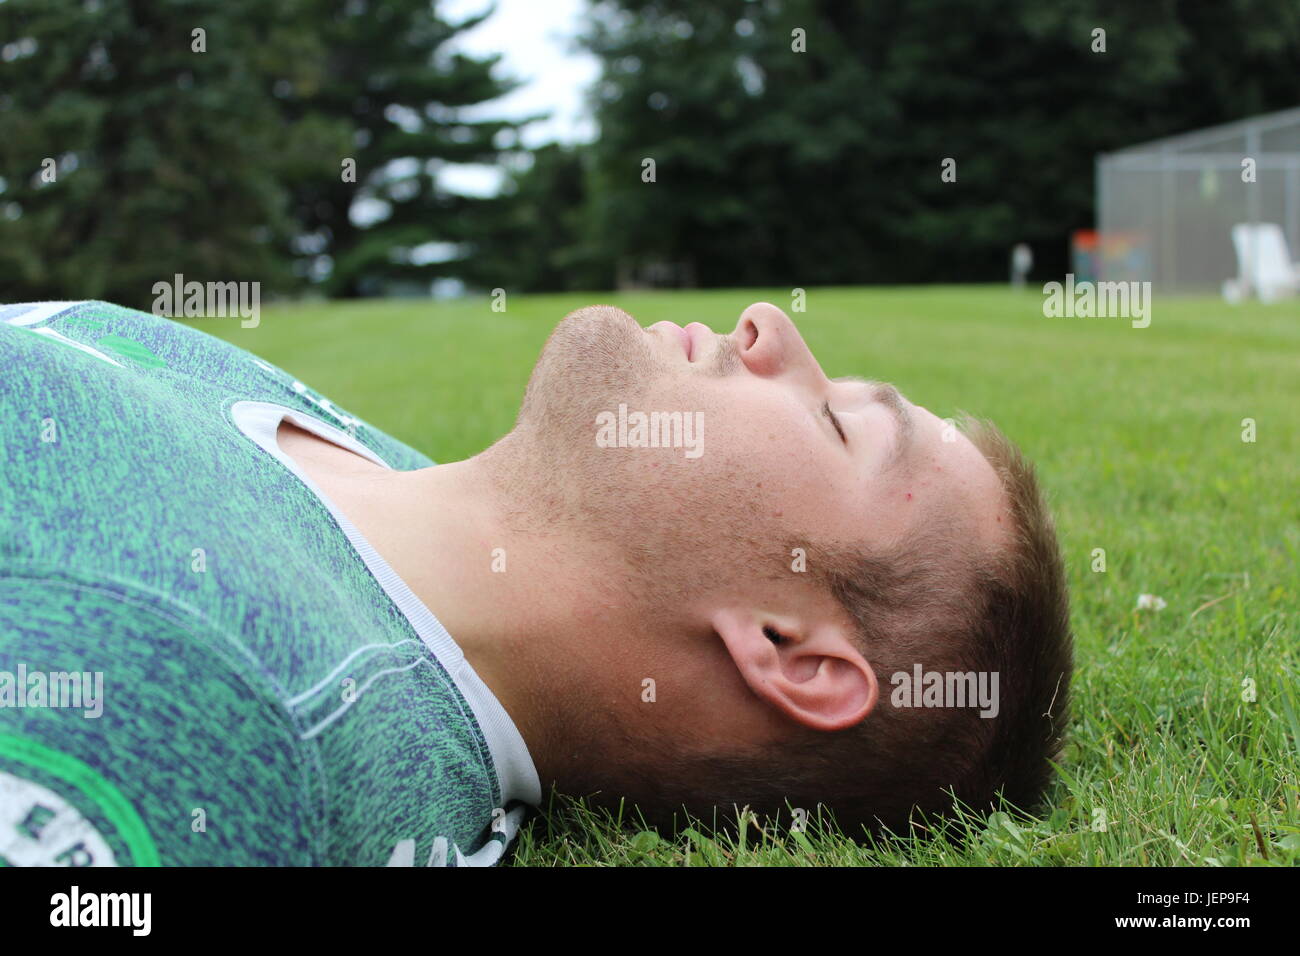 Looking up with closed eyes. Stock Photo